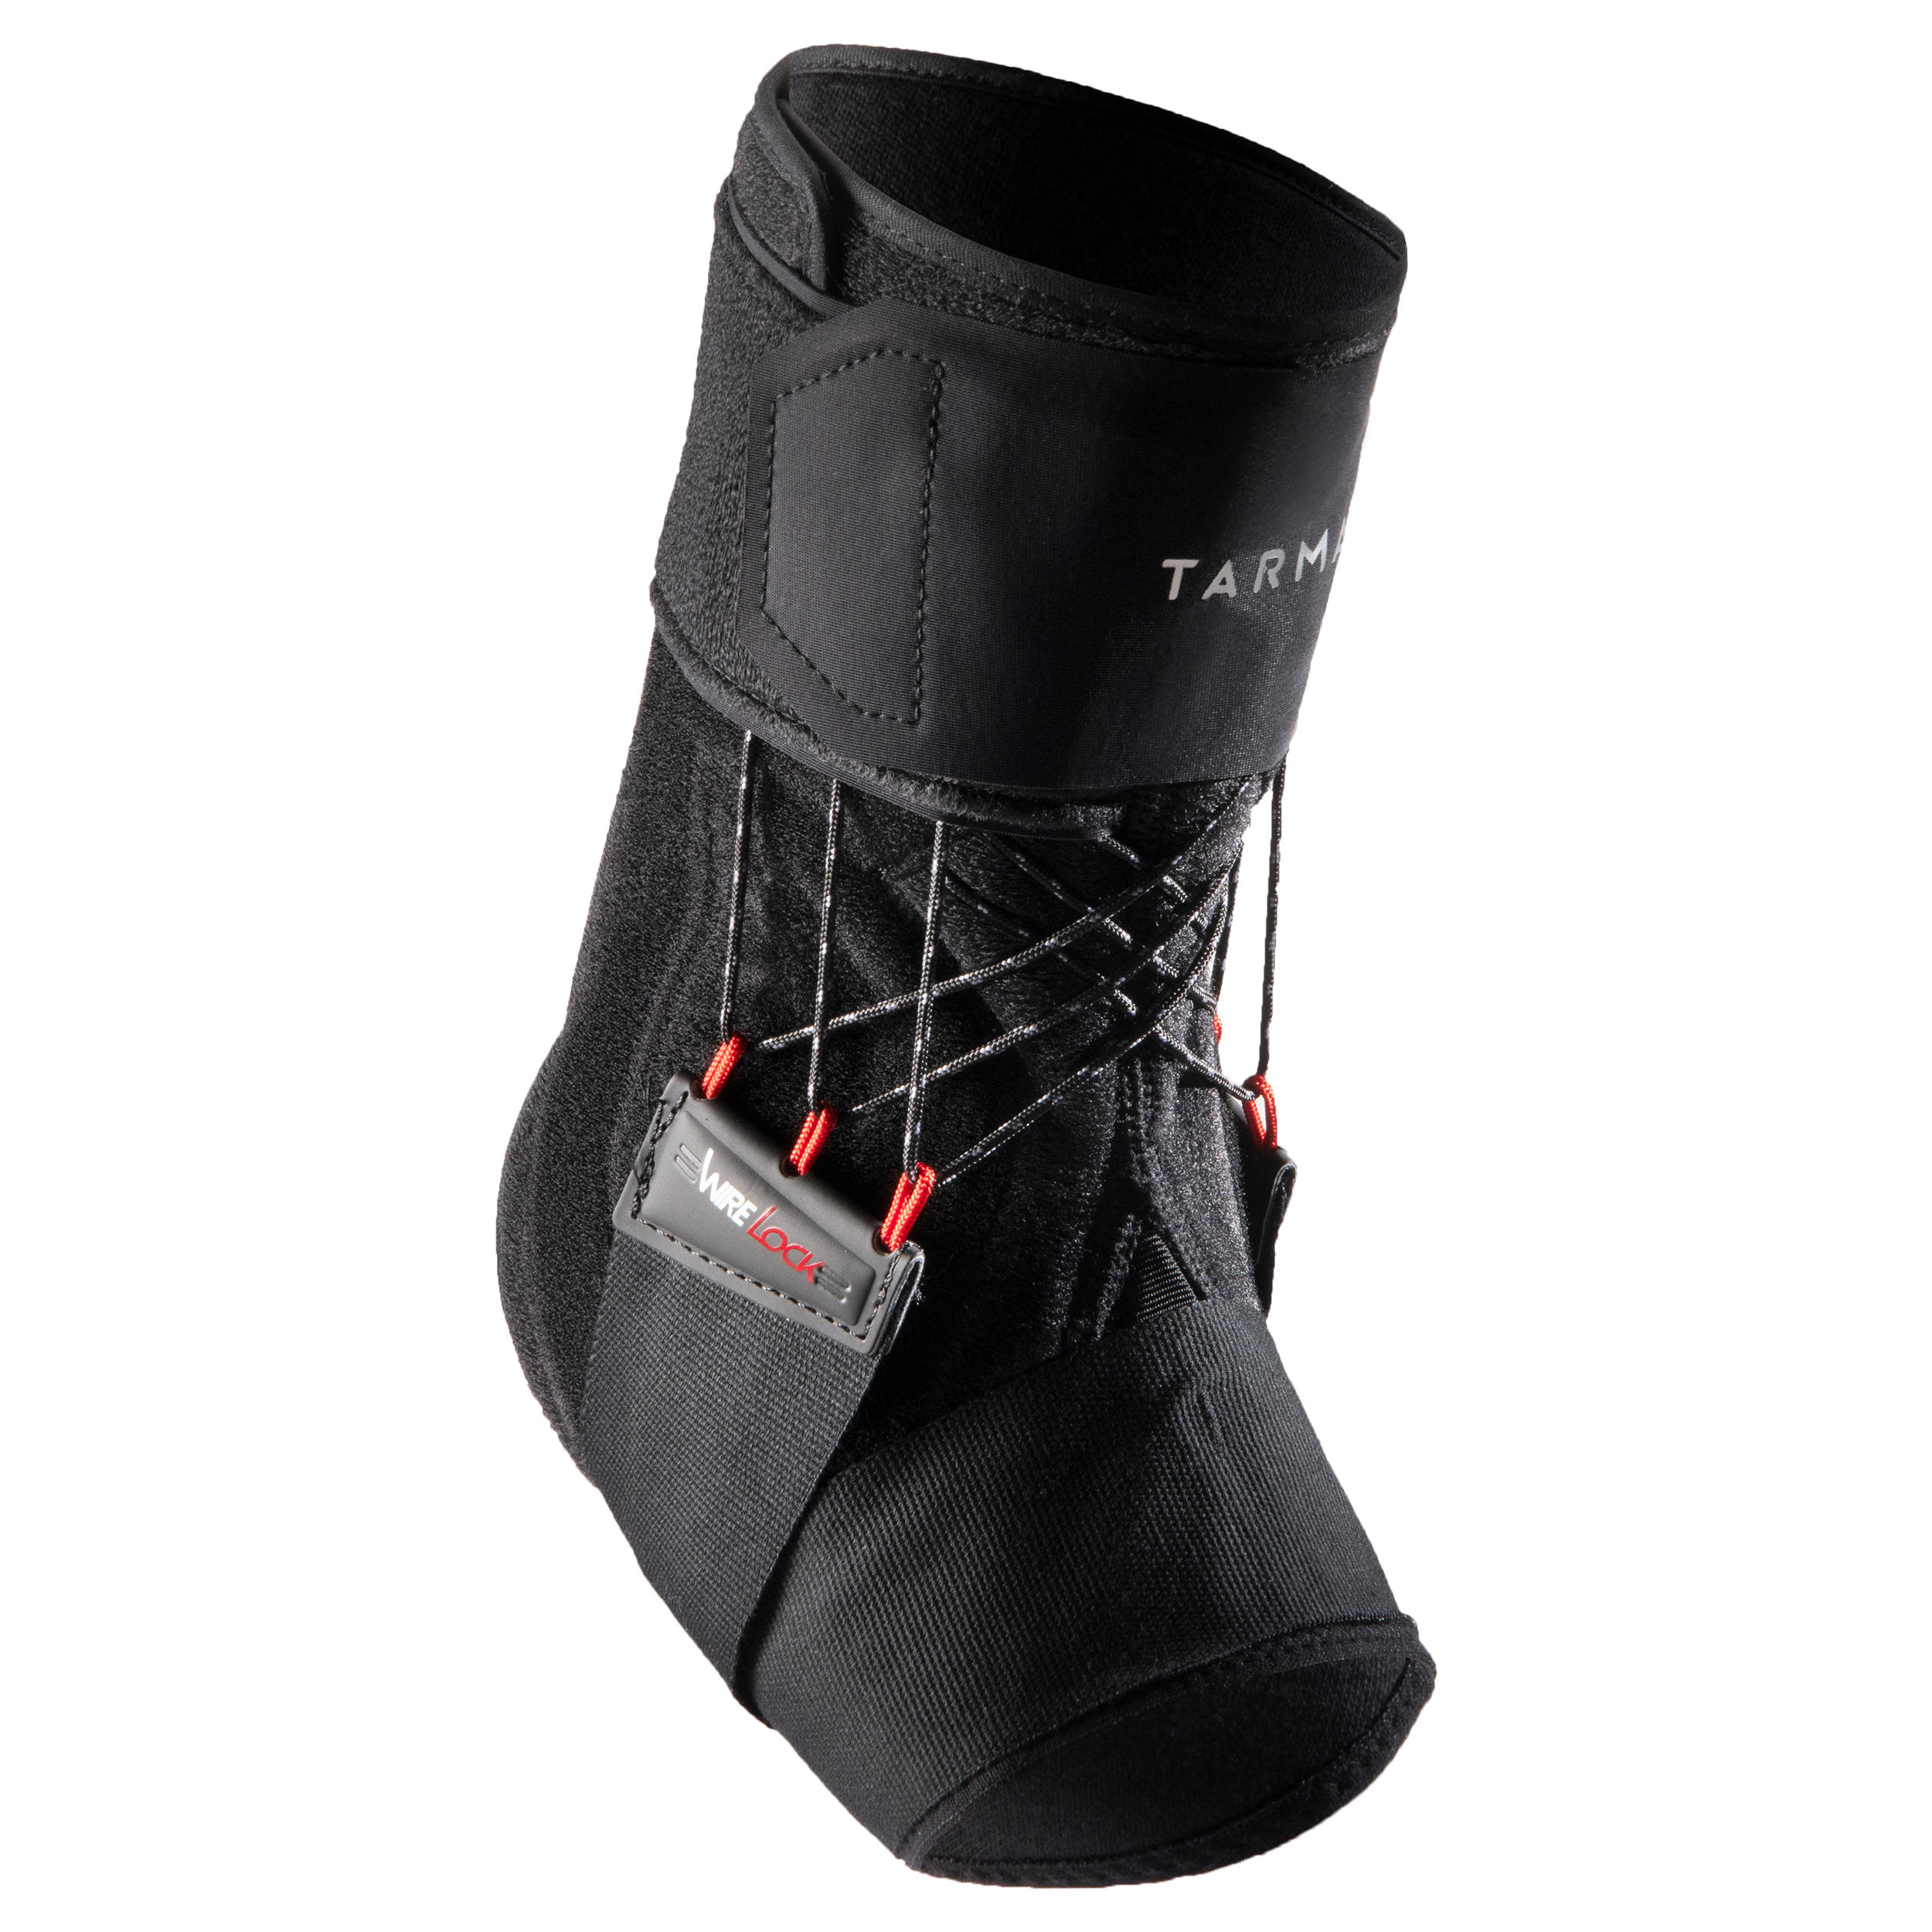 ankle support boot near me